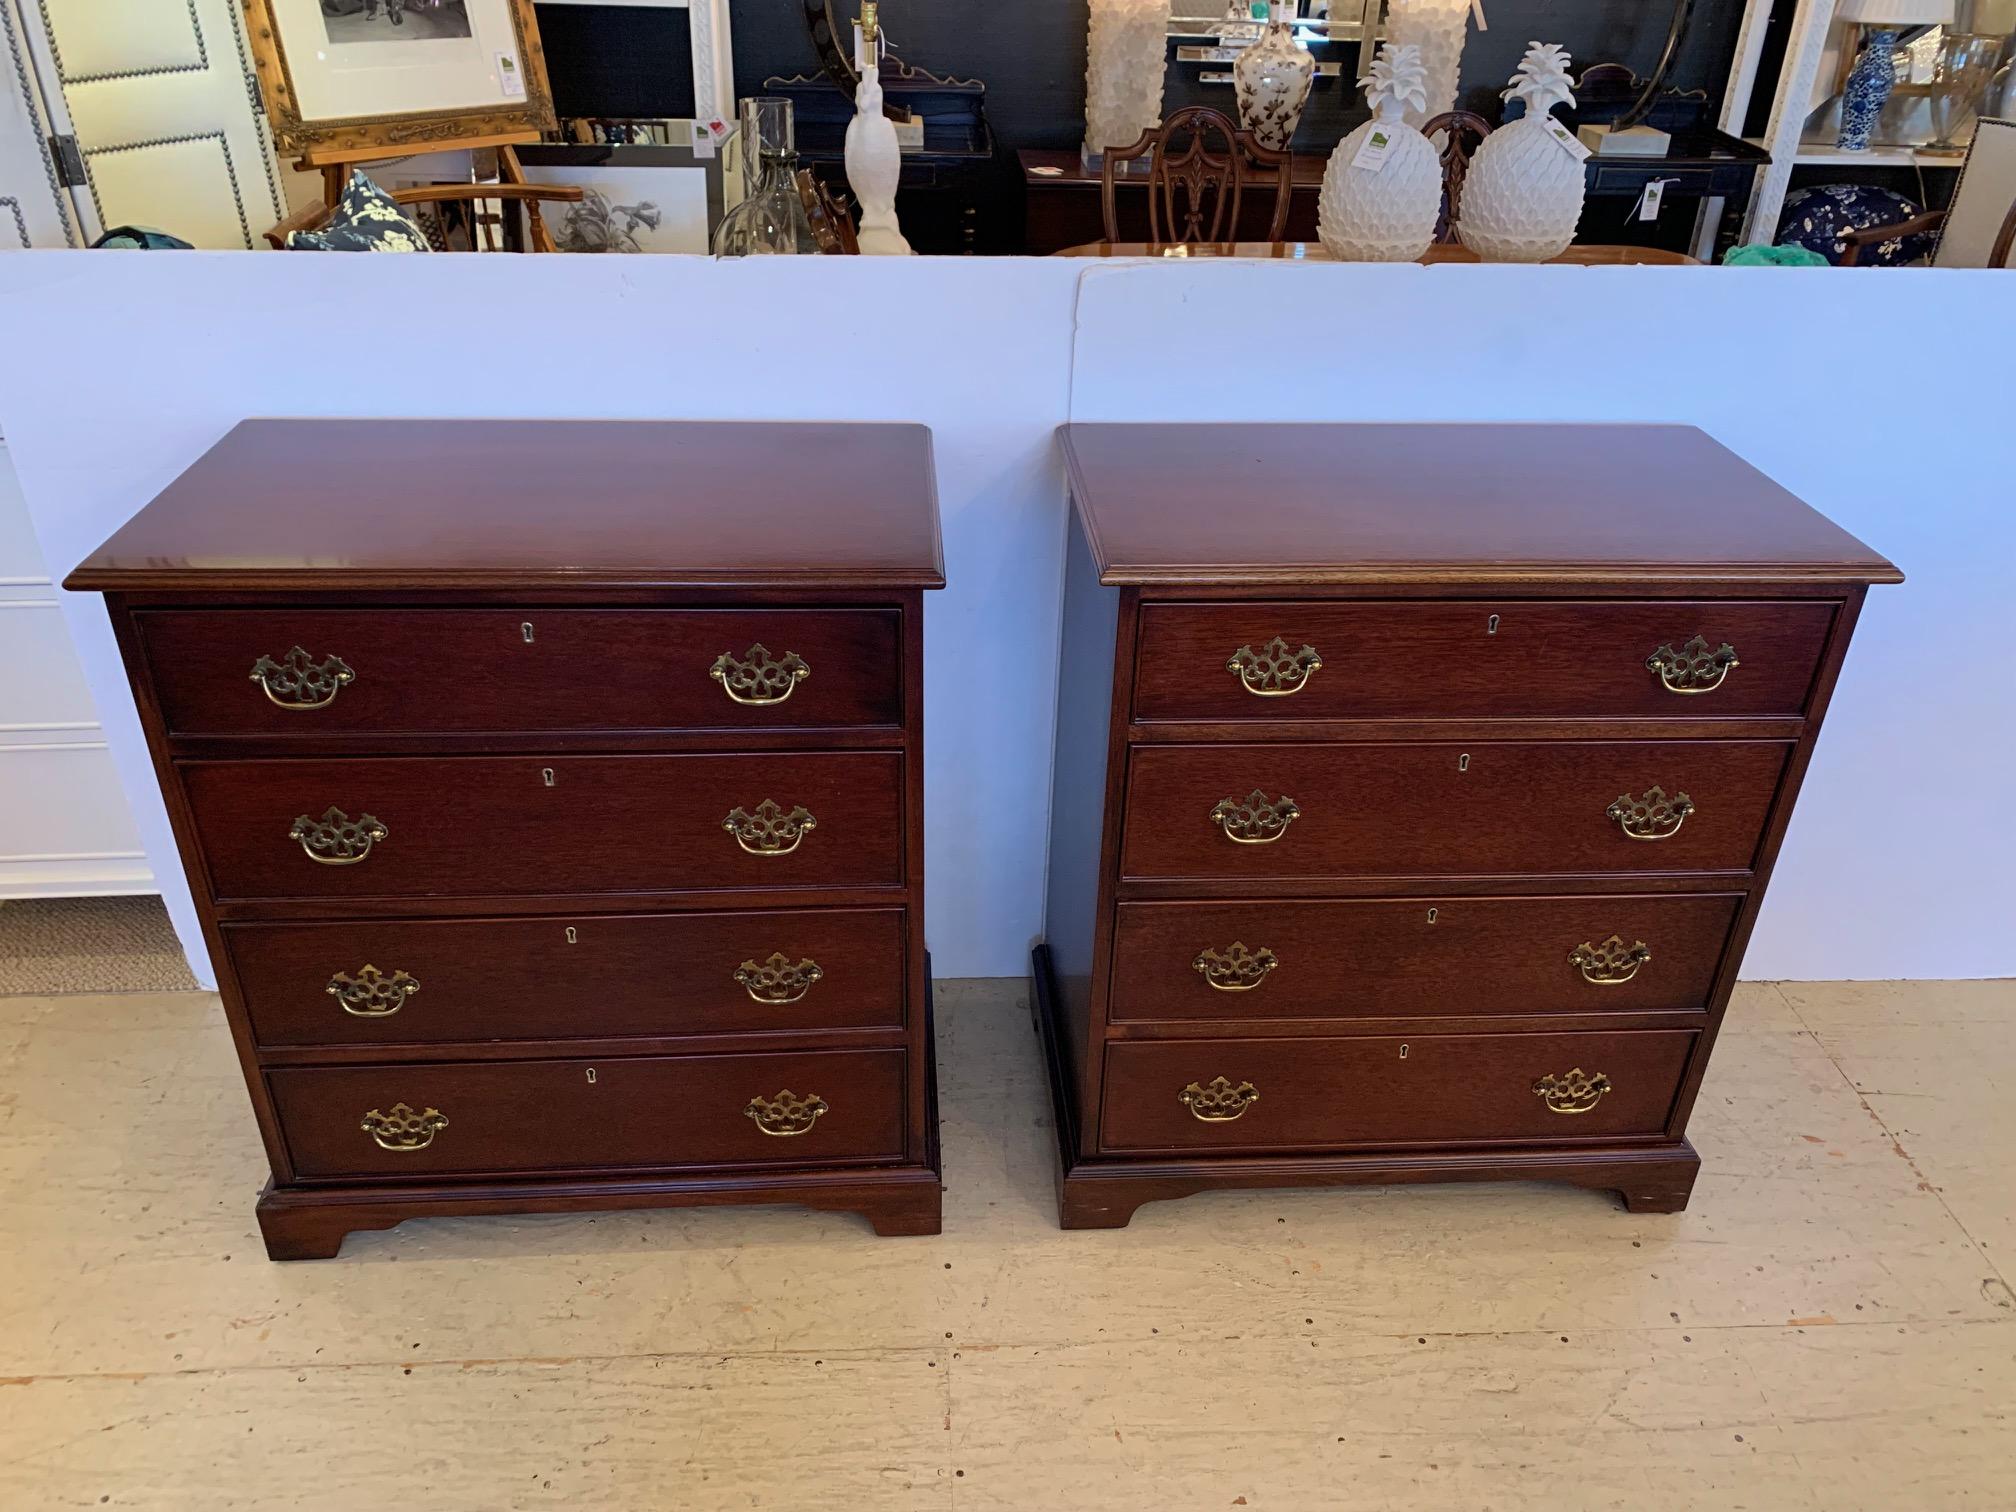 Handsome pair of Chippendale style mahogany bachelors chests having 4 drawers, brass hardware and keyholes.